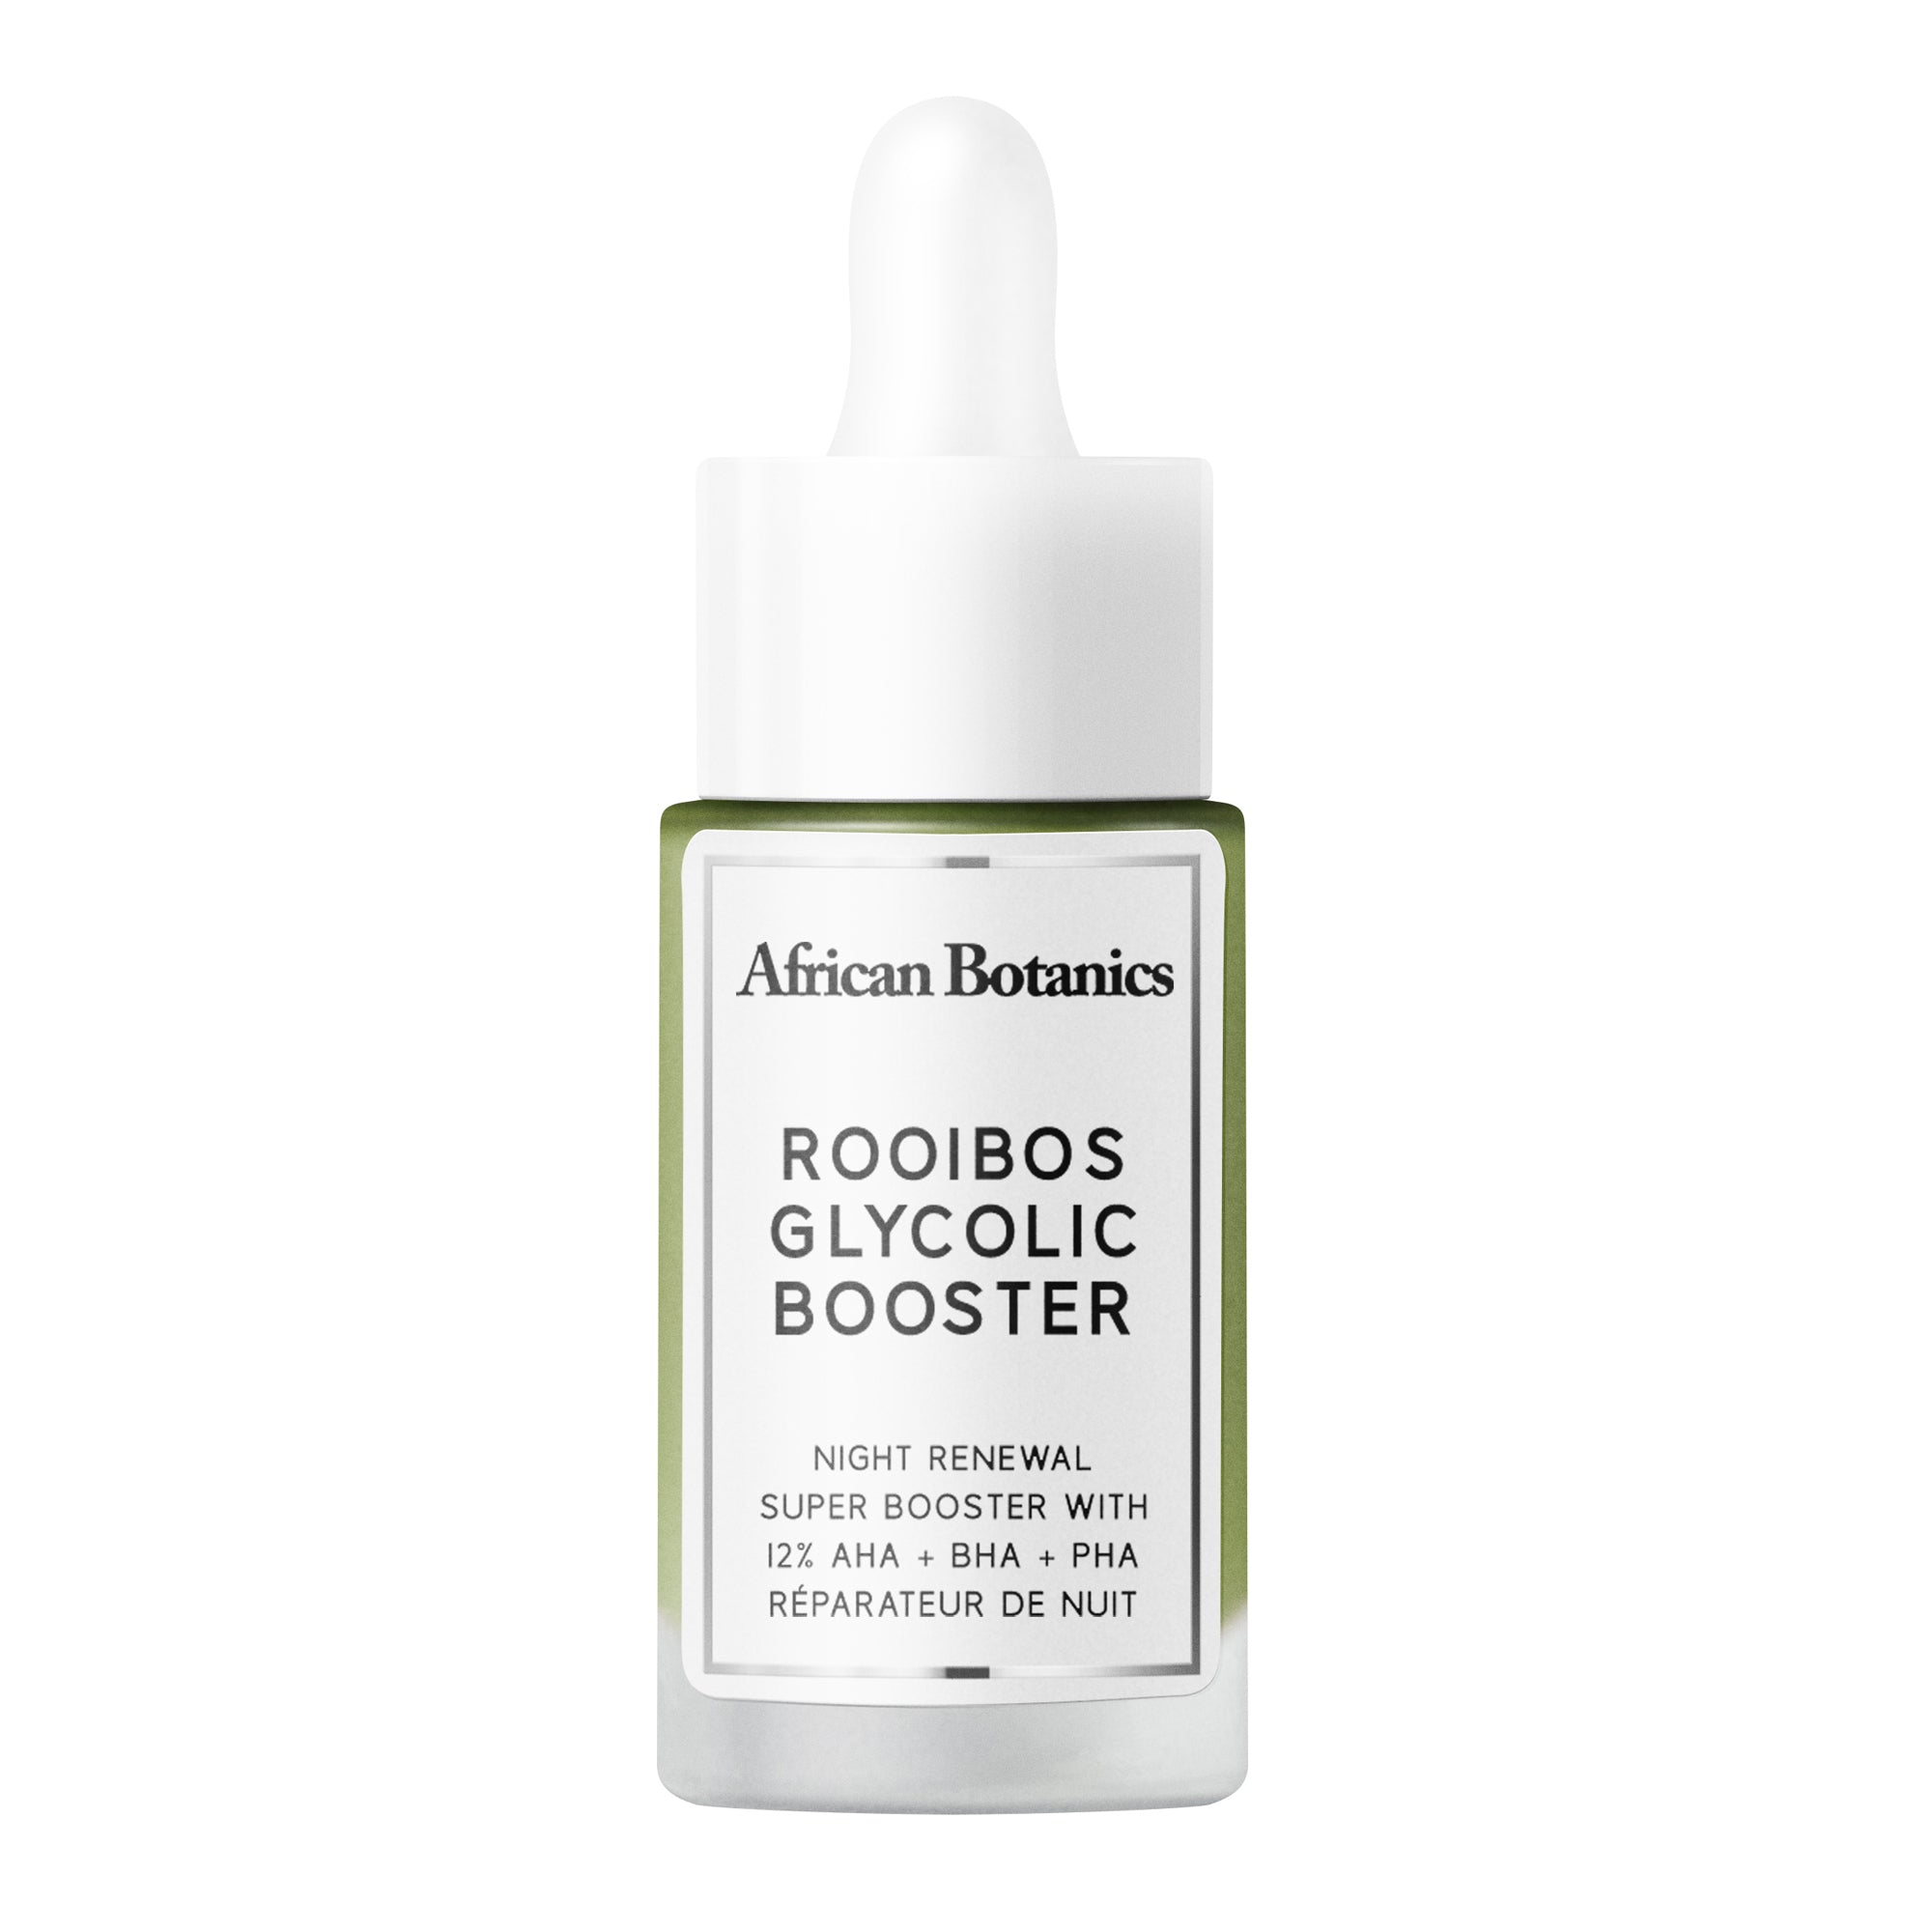 
  
  African Botanics Rooibos Glycolic Booster- LORDE beauty and cosmetics
  
